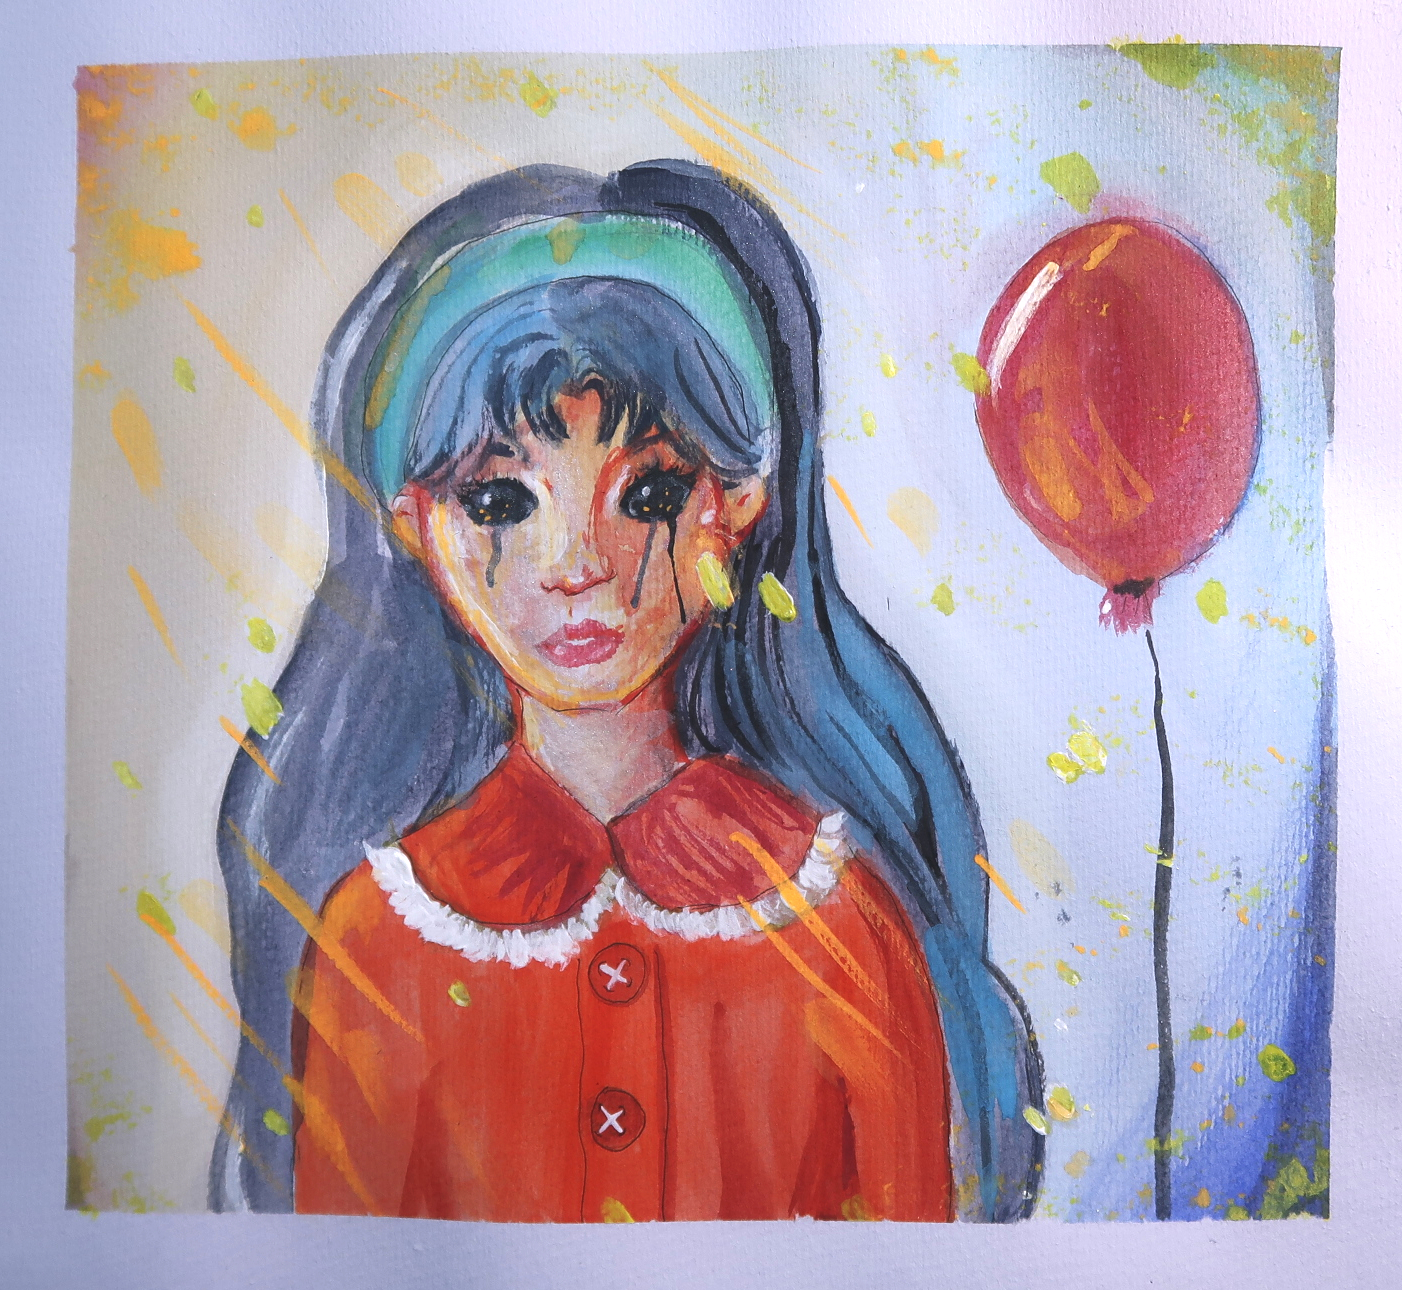 The girl and her balloon by orianajones